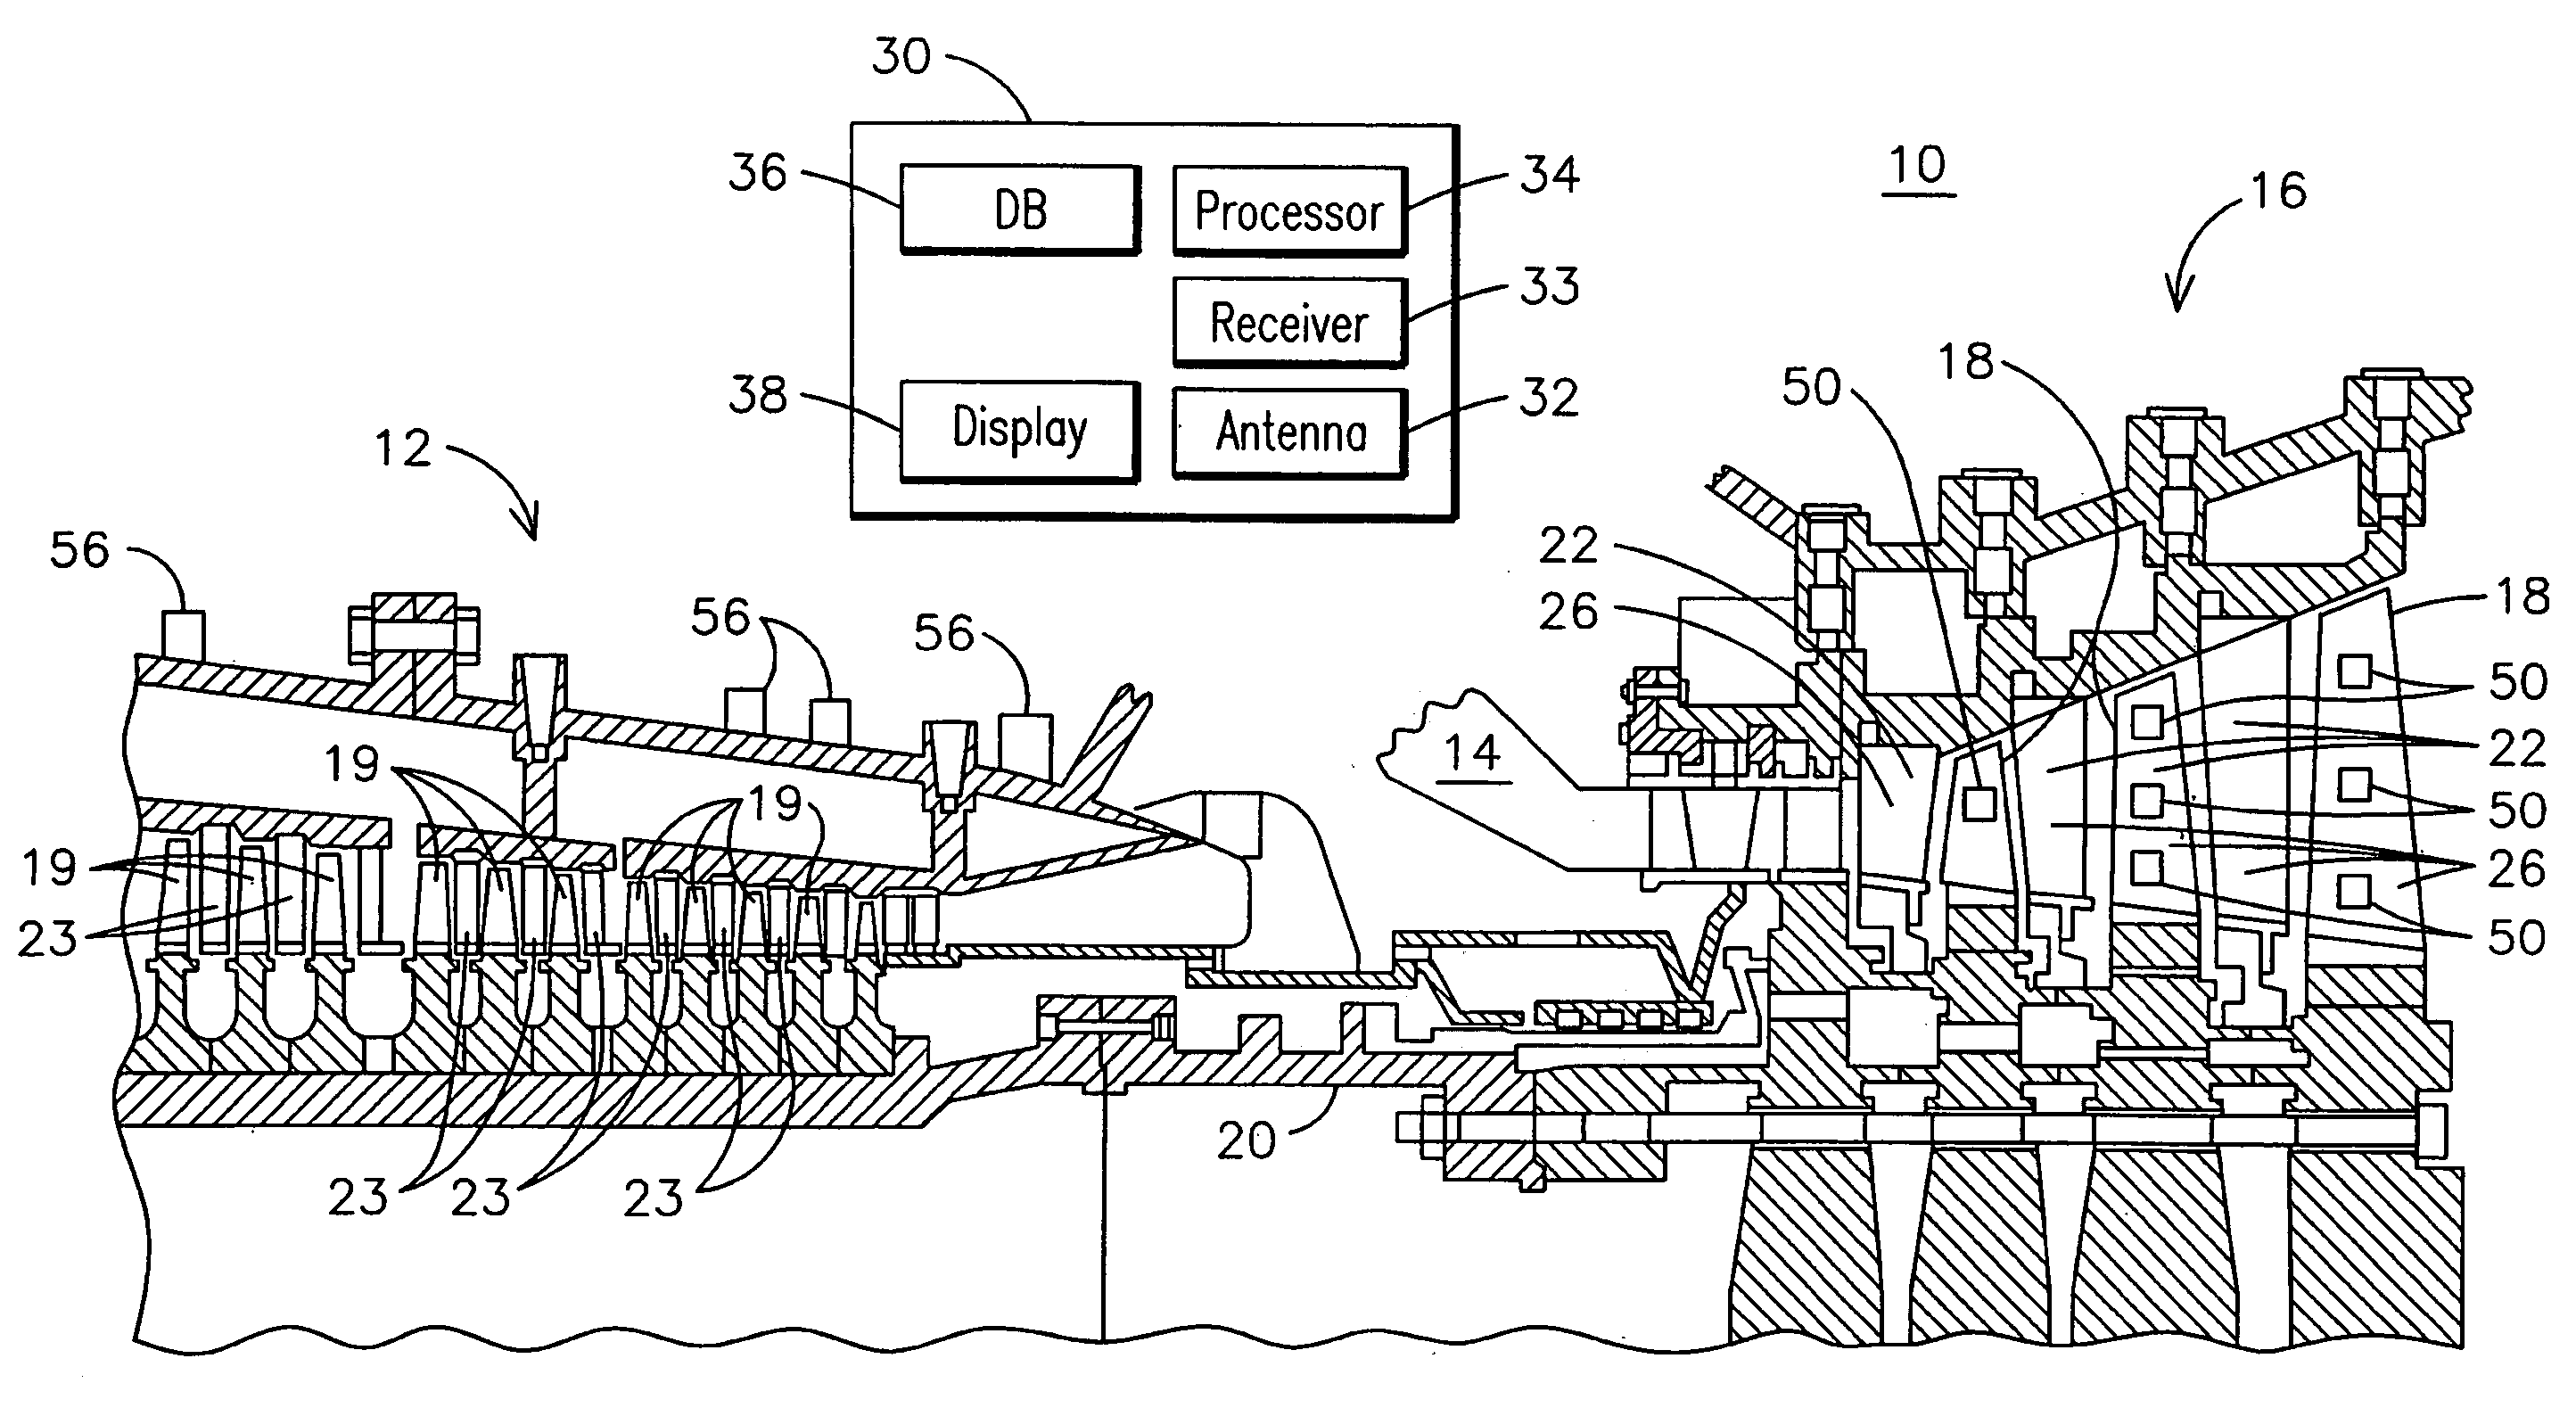 Apparatus and method of detecting wear in an abradable coating system